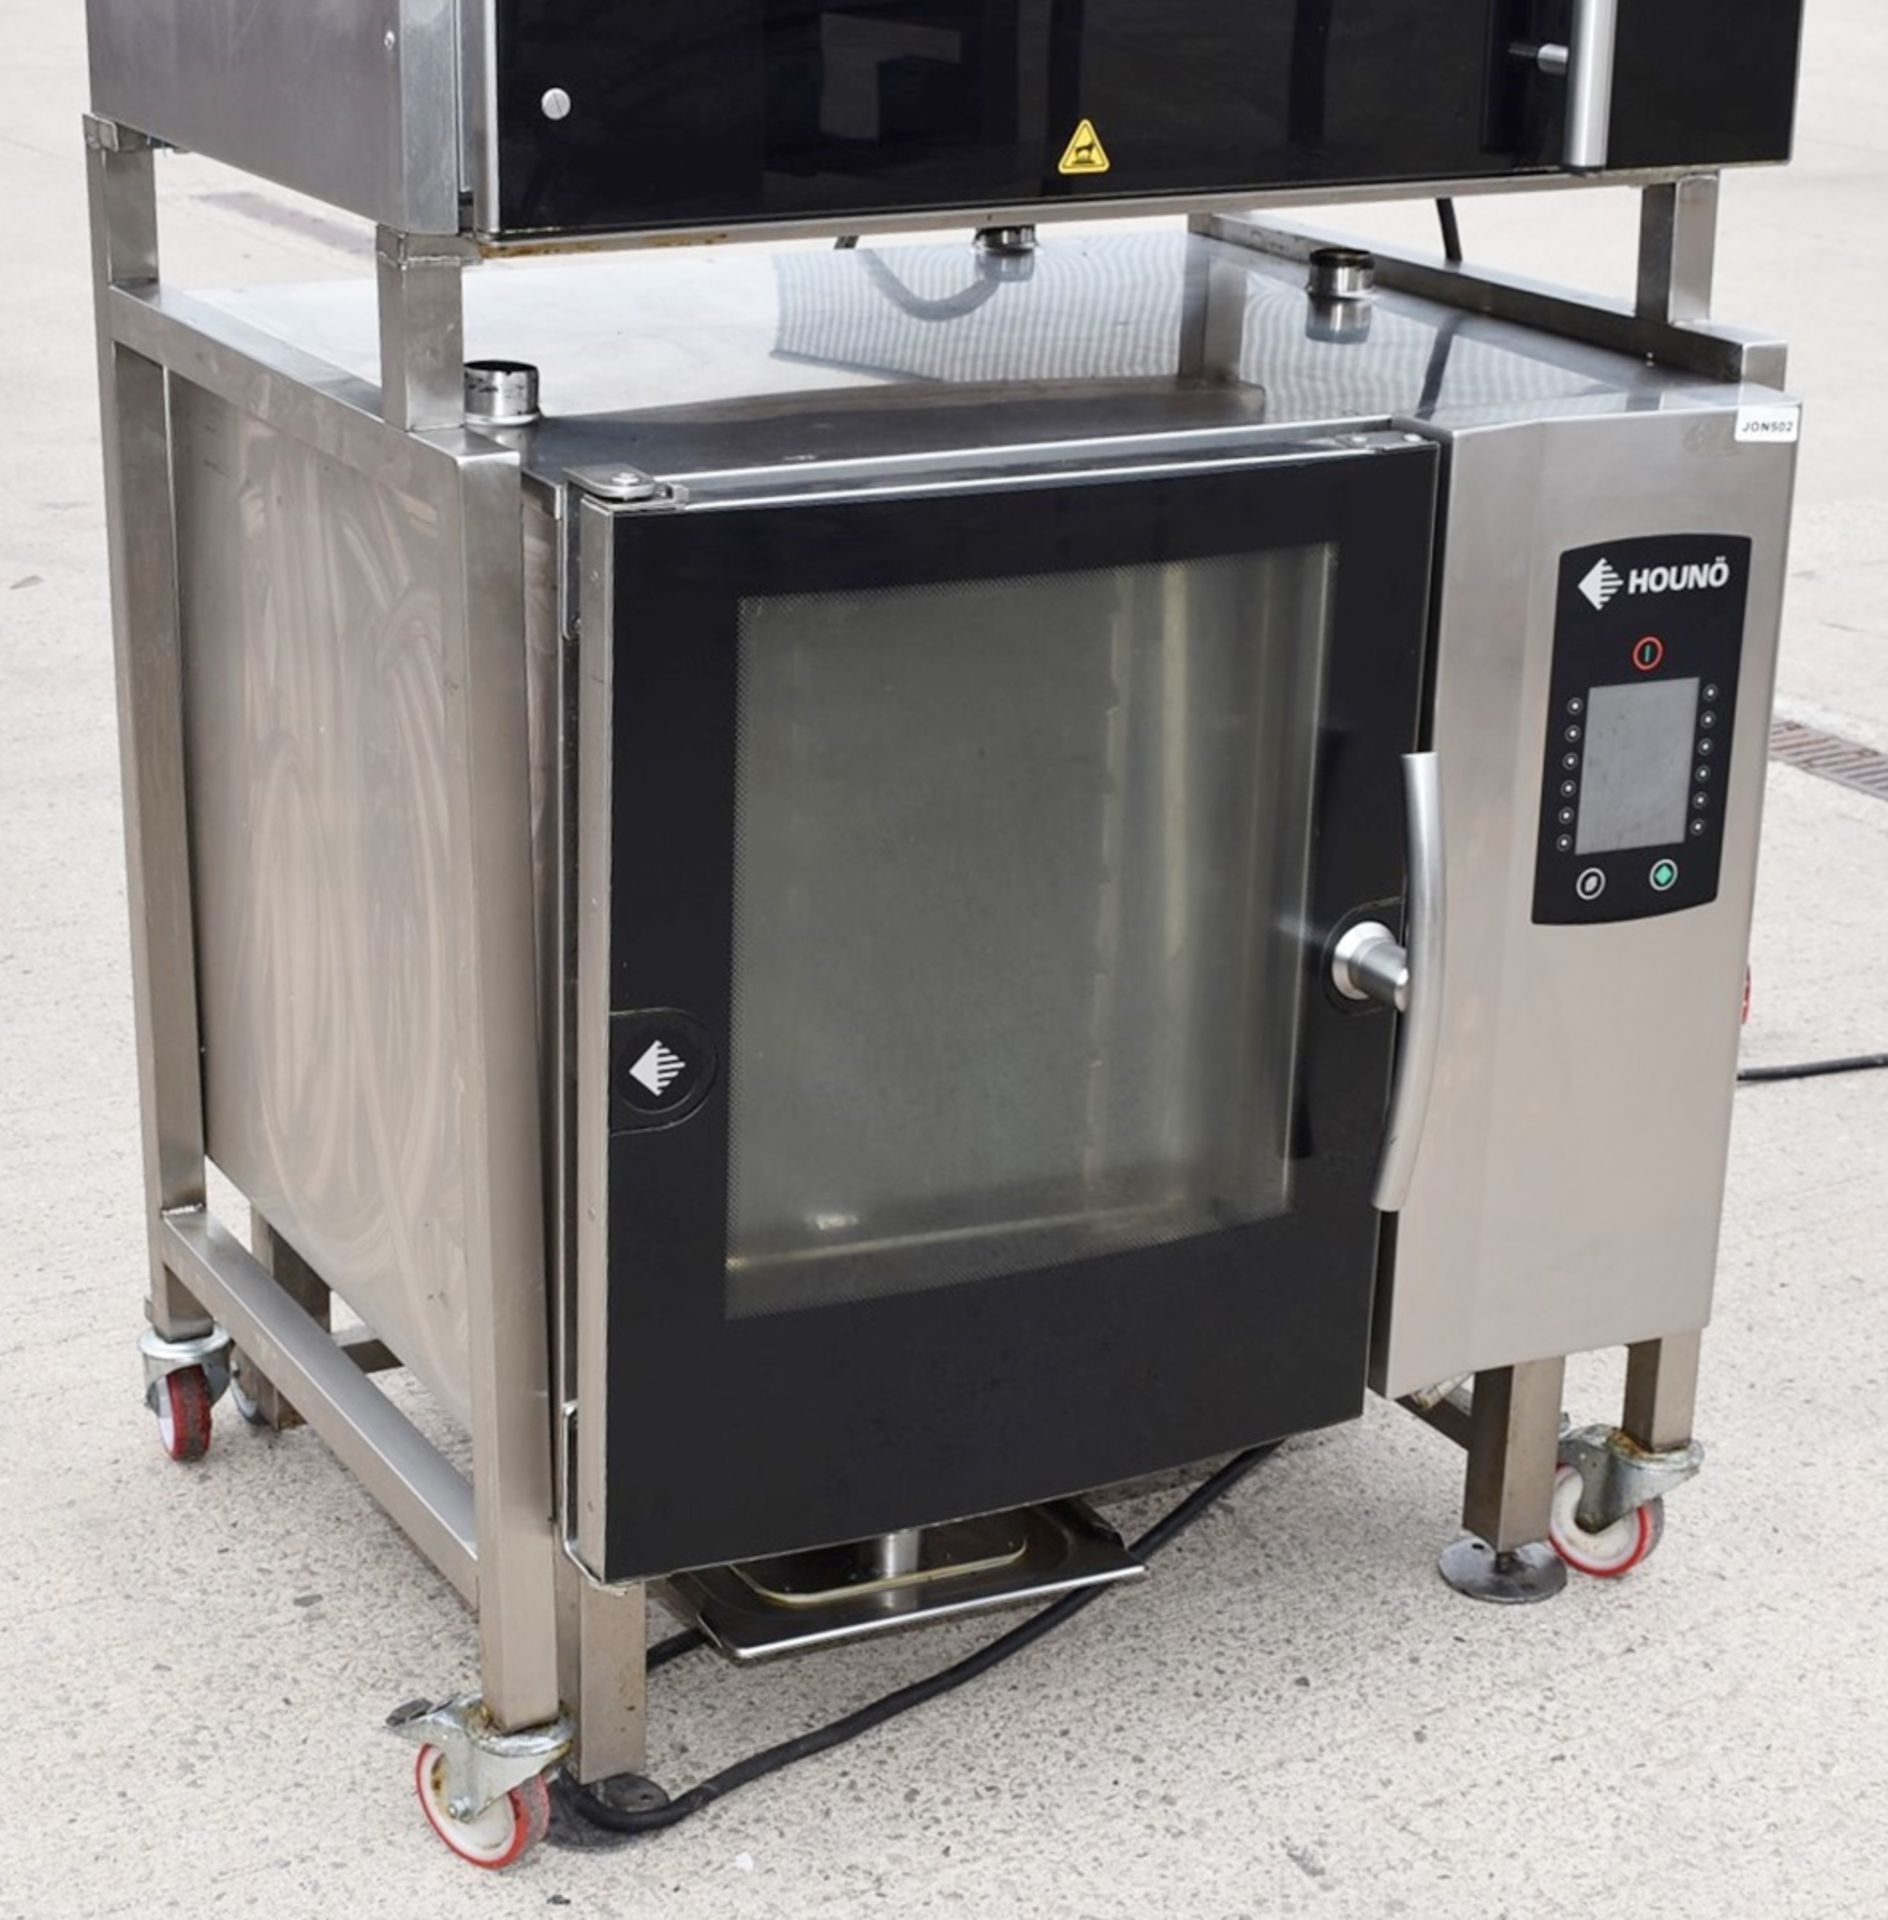 1 x Houno Electric Combi Oven and Fri-jado Rotisserie Oven Combo With Stand - 3 Phase - Image 6 of 22